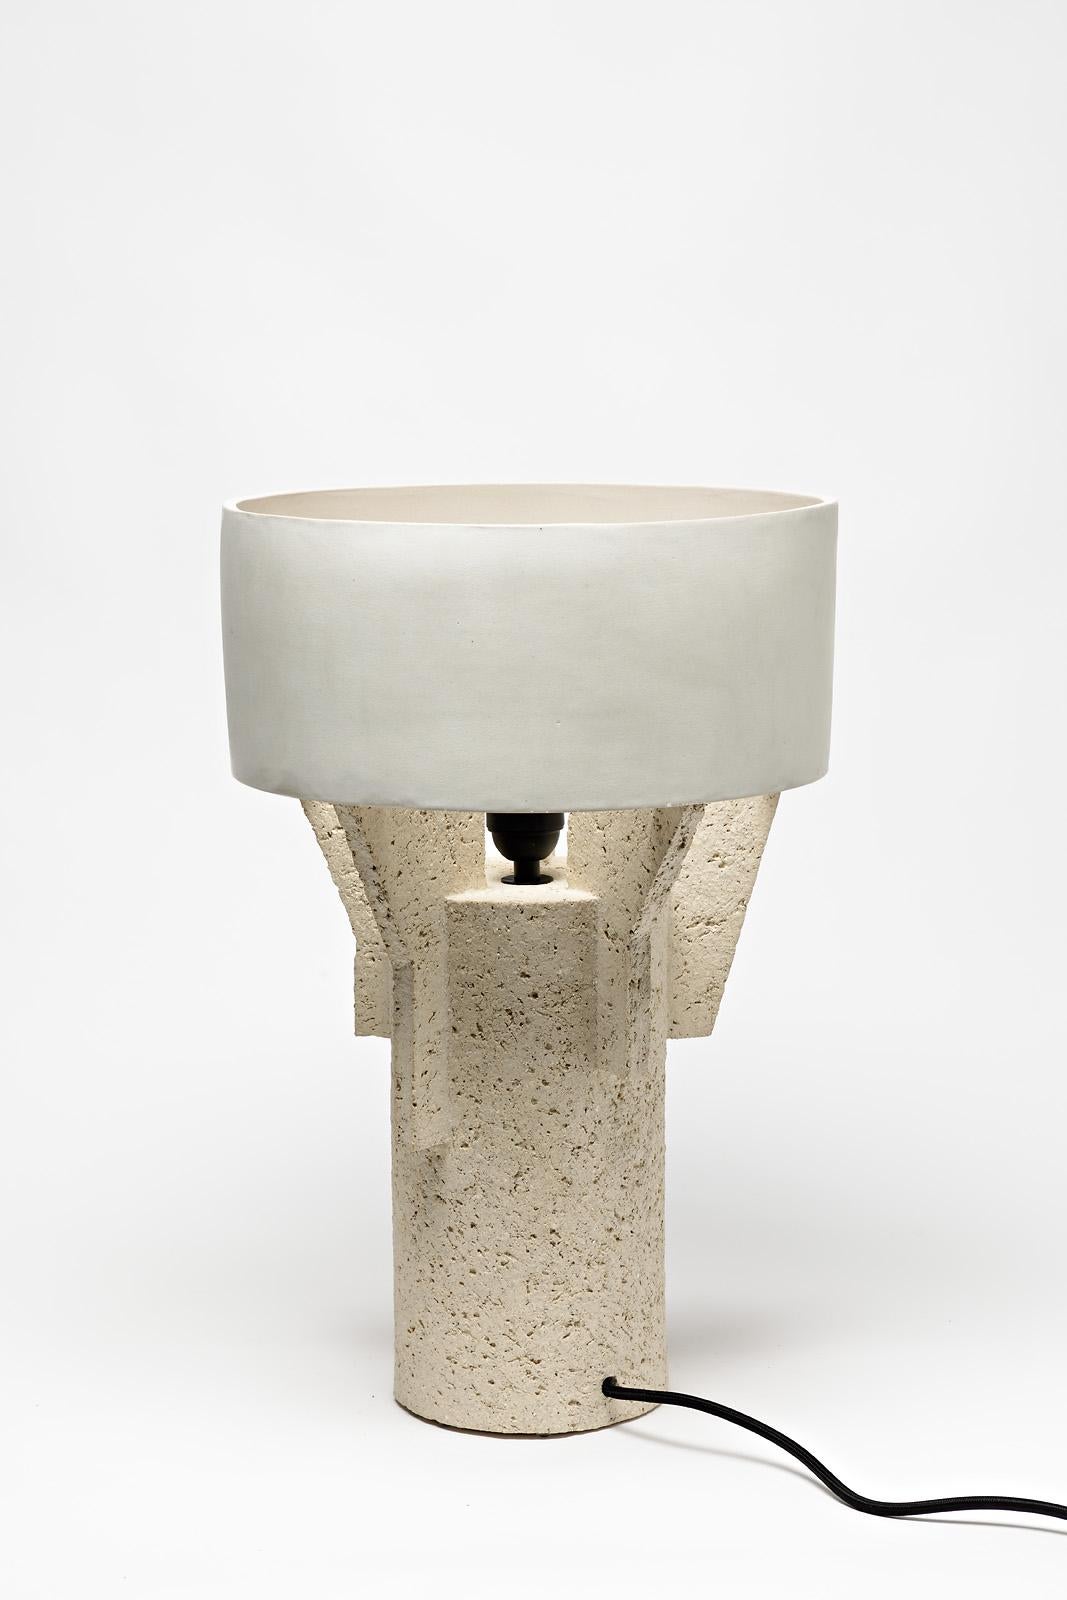 Pair of Ceramic Table Lamps by Denis Castaing with Brown Glaze, 2019 For Sale 1